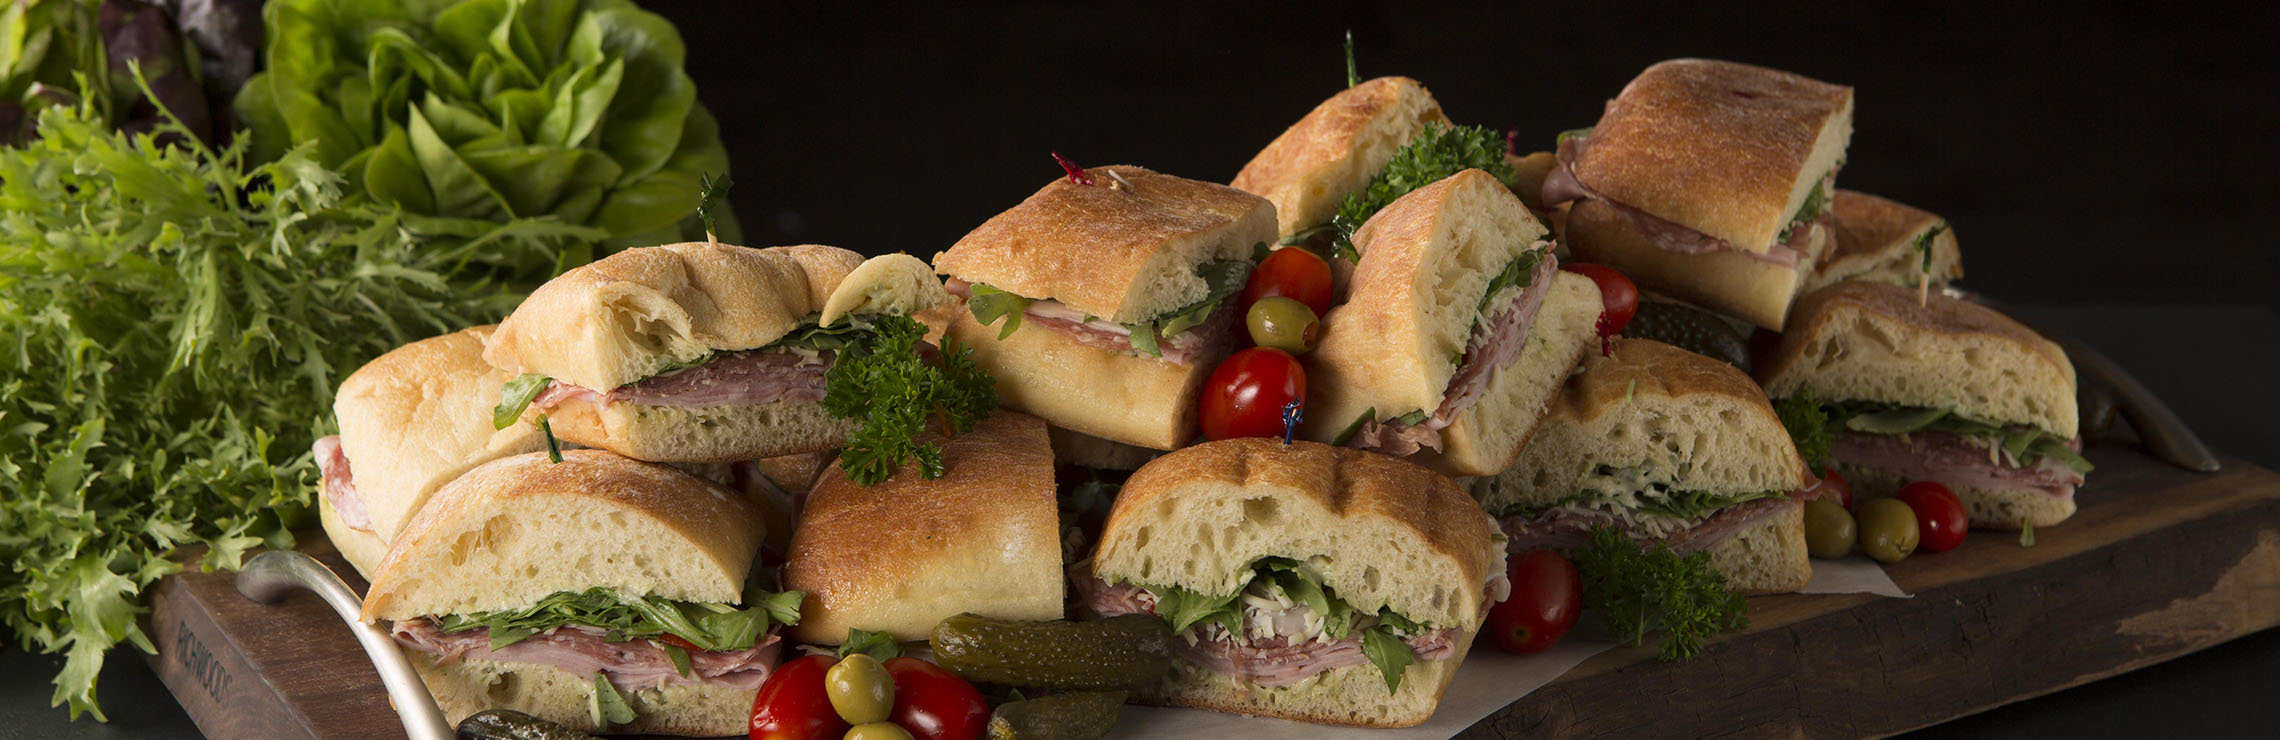 A platter of fresh sandwiches by Ryerson Eats catering.